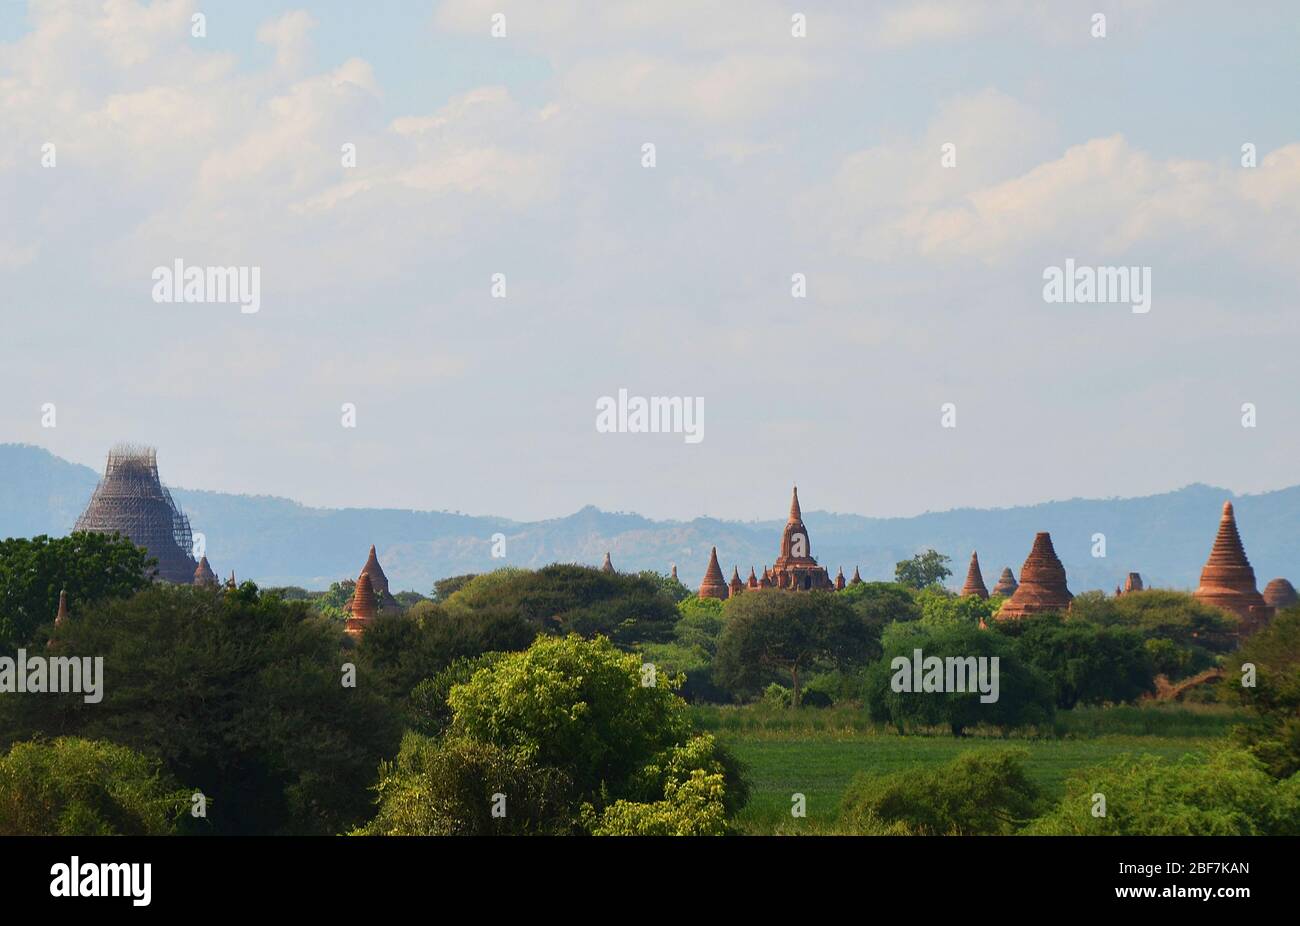 Red bricked temples in central plain Bagan Myanmar I Stock Photo